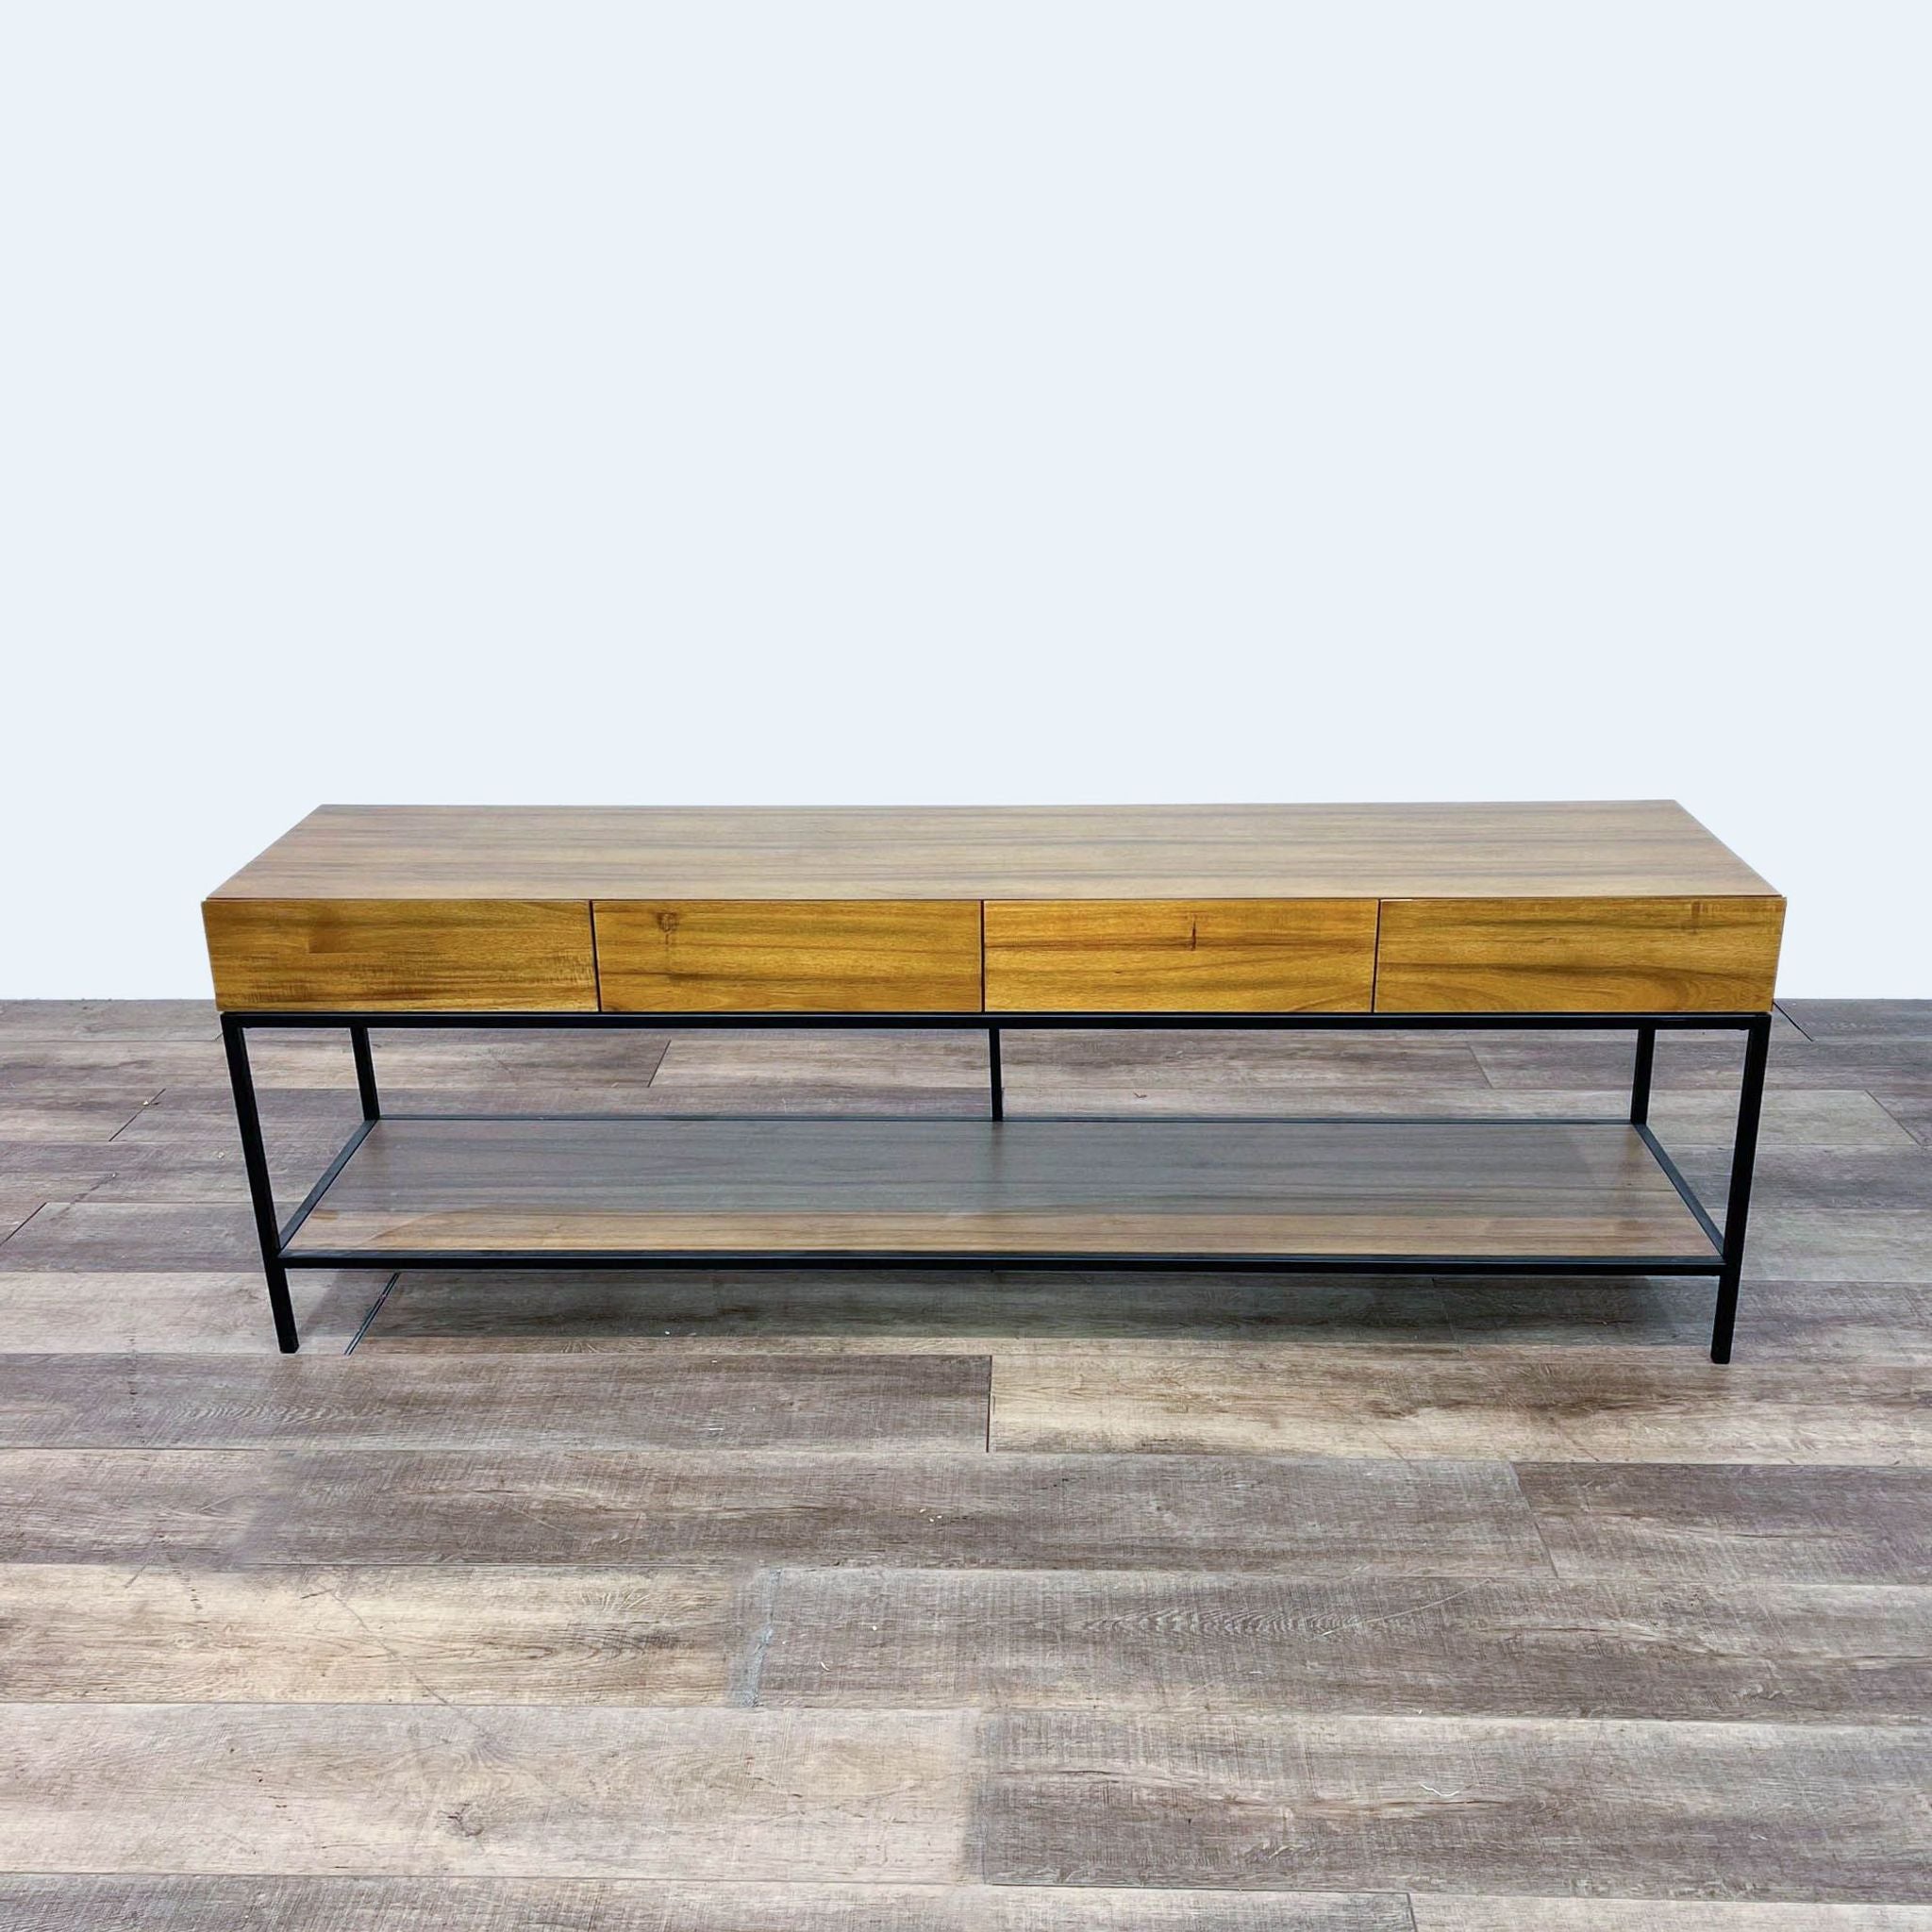 Alt text 1: ROC brand wooden sideboard with metal base and closed drawers on a wood-patterned floor.